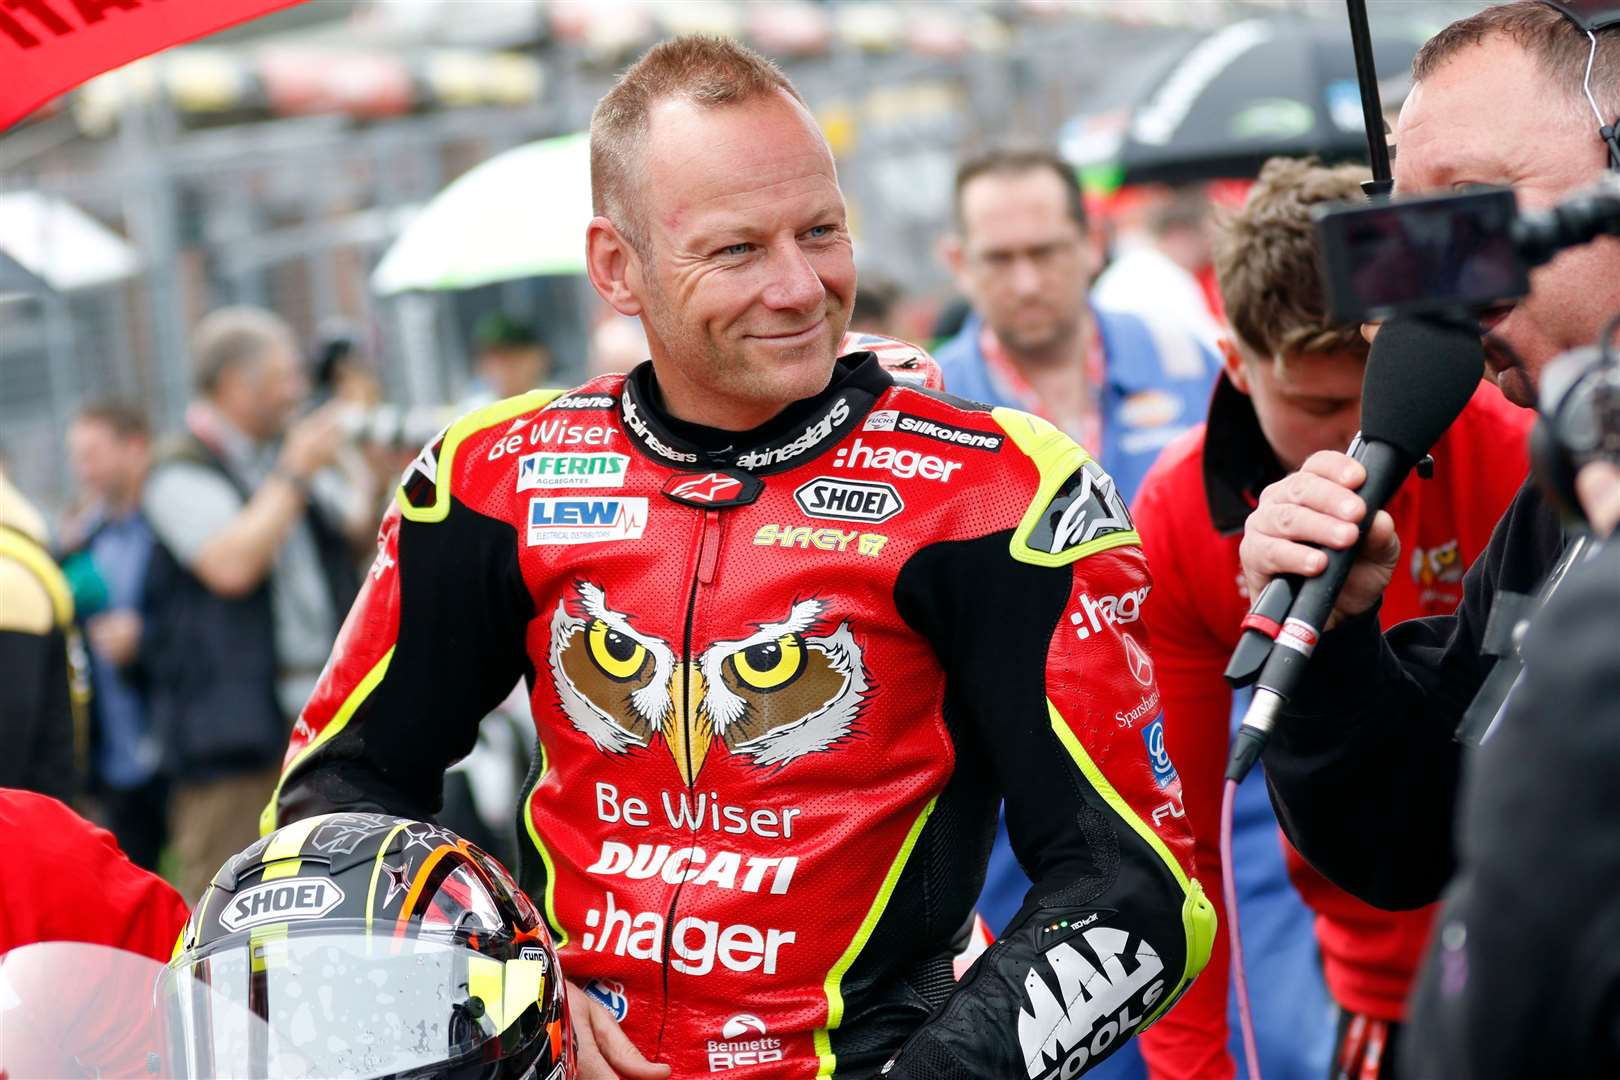 Shane Byrne, pictured, paid tribute to the motorbike legend